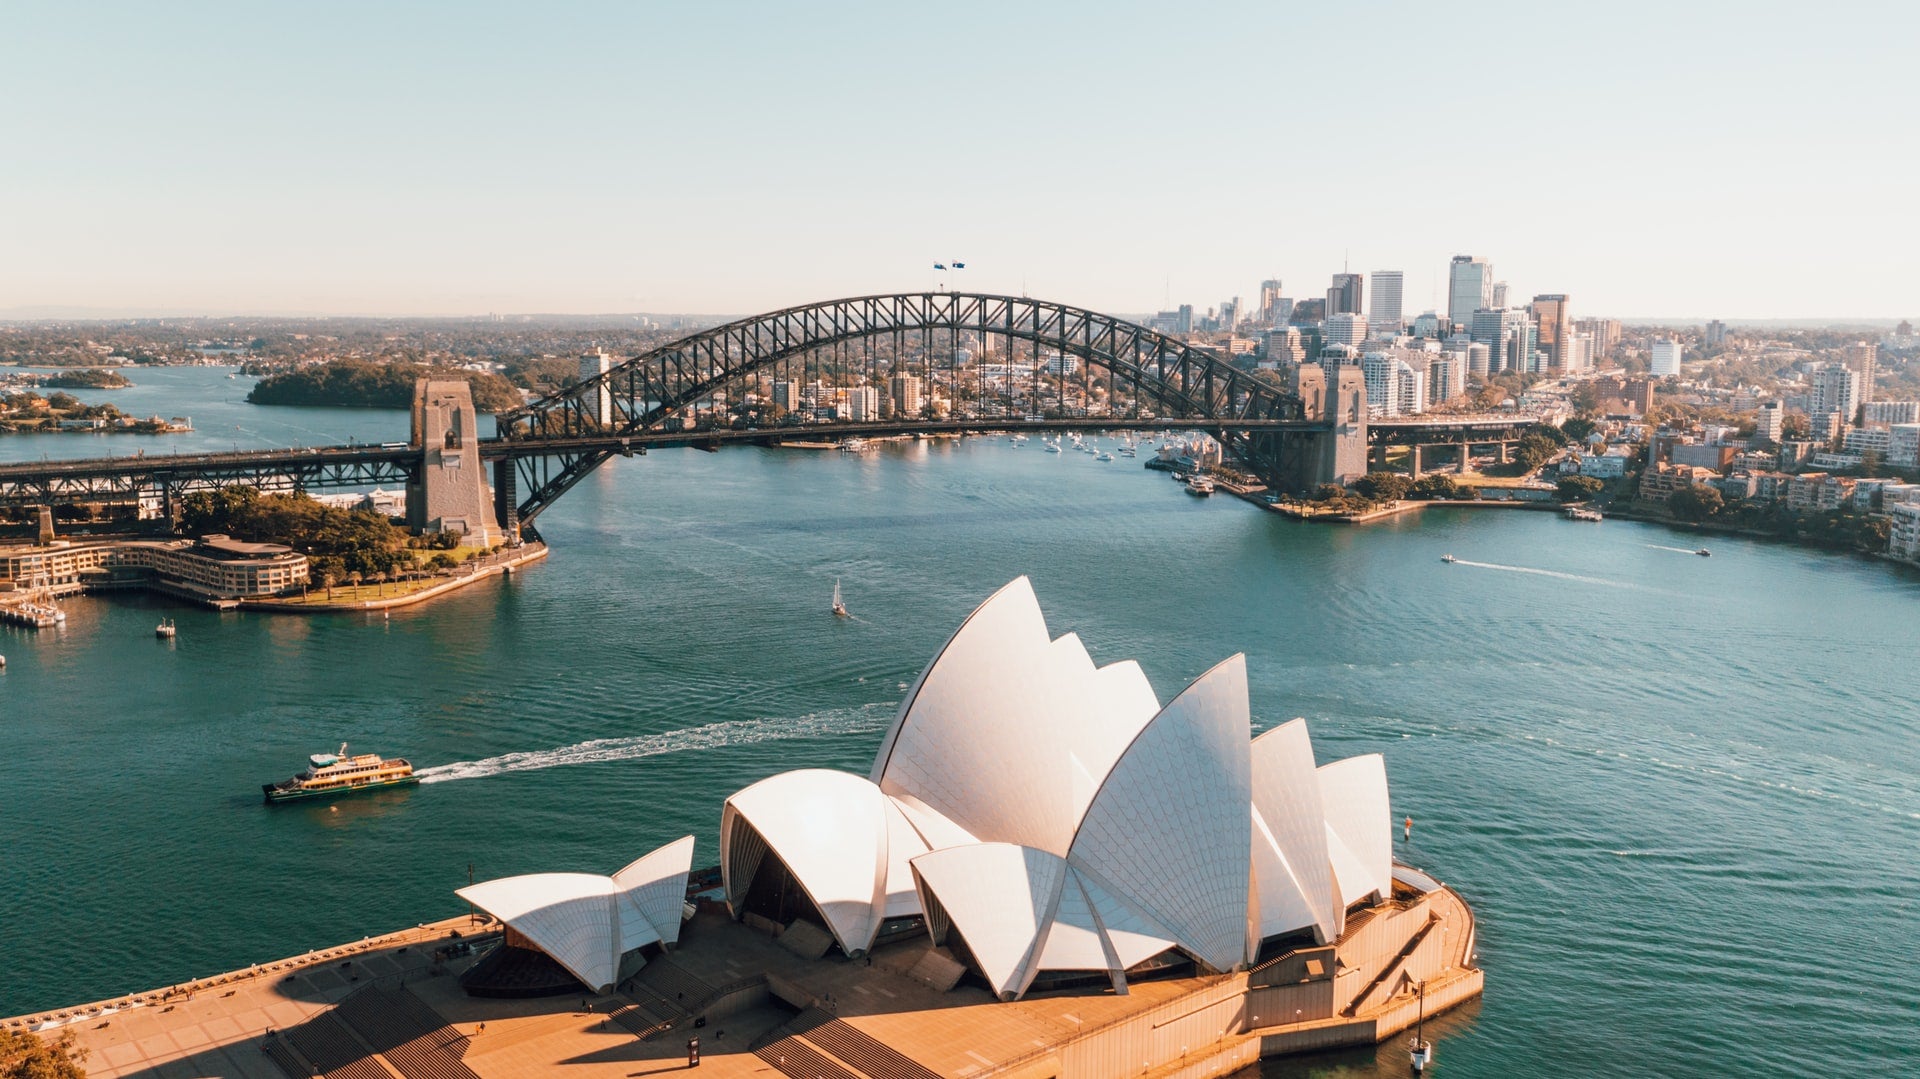 DataMesh joins forces with Ingenico to enhance payment services in Australia